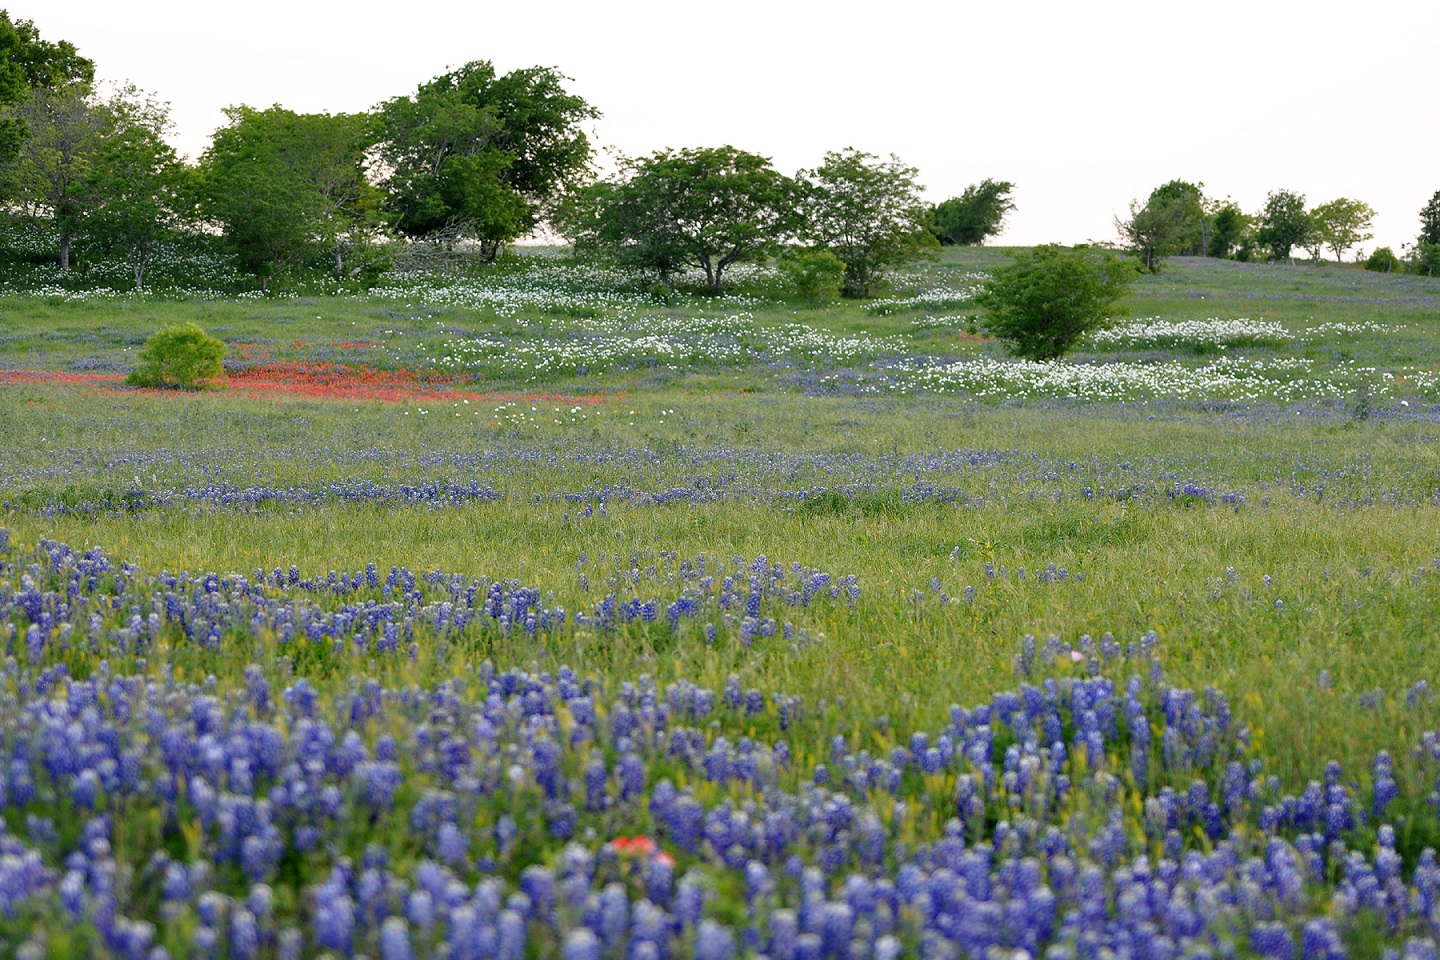 Photo of a field with purple, white, and red flowers and green grass in the foreground, with isolated trees in the background.